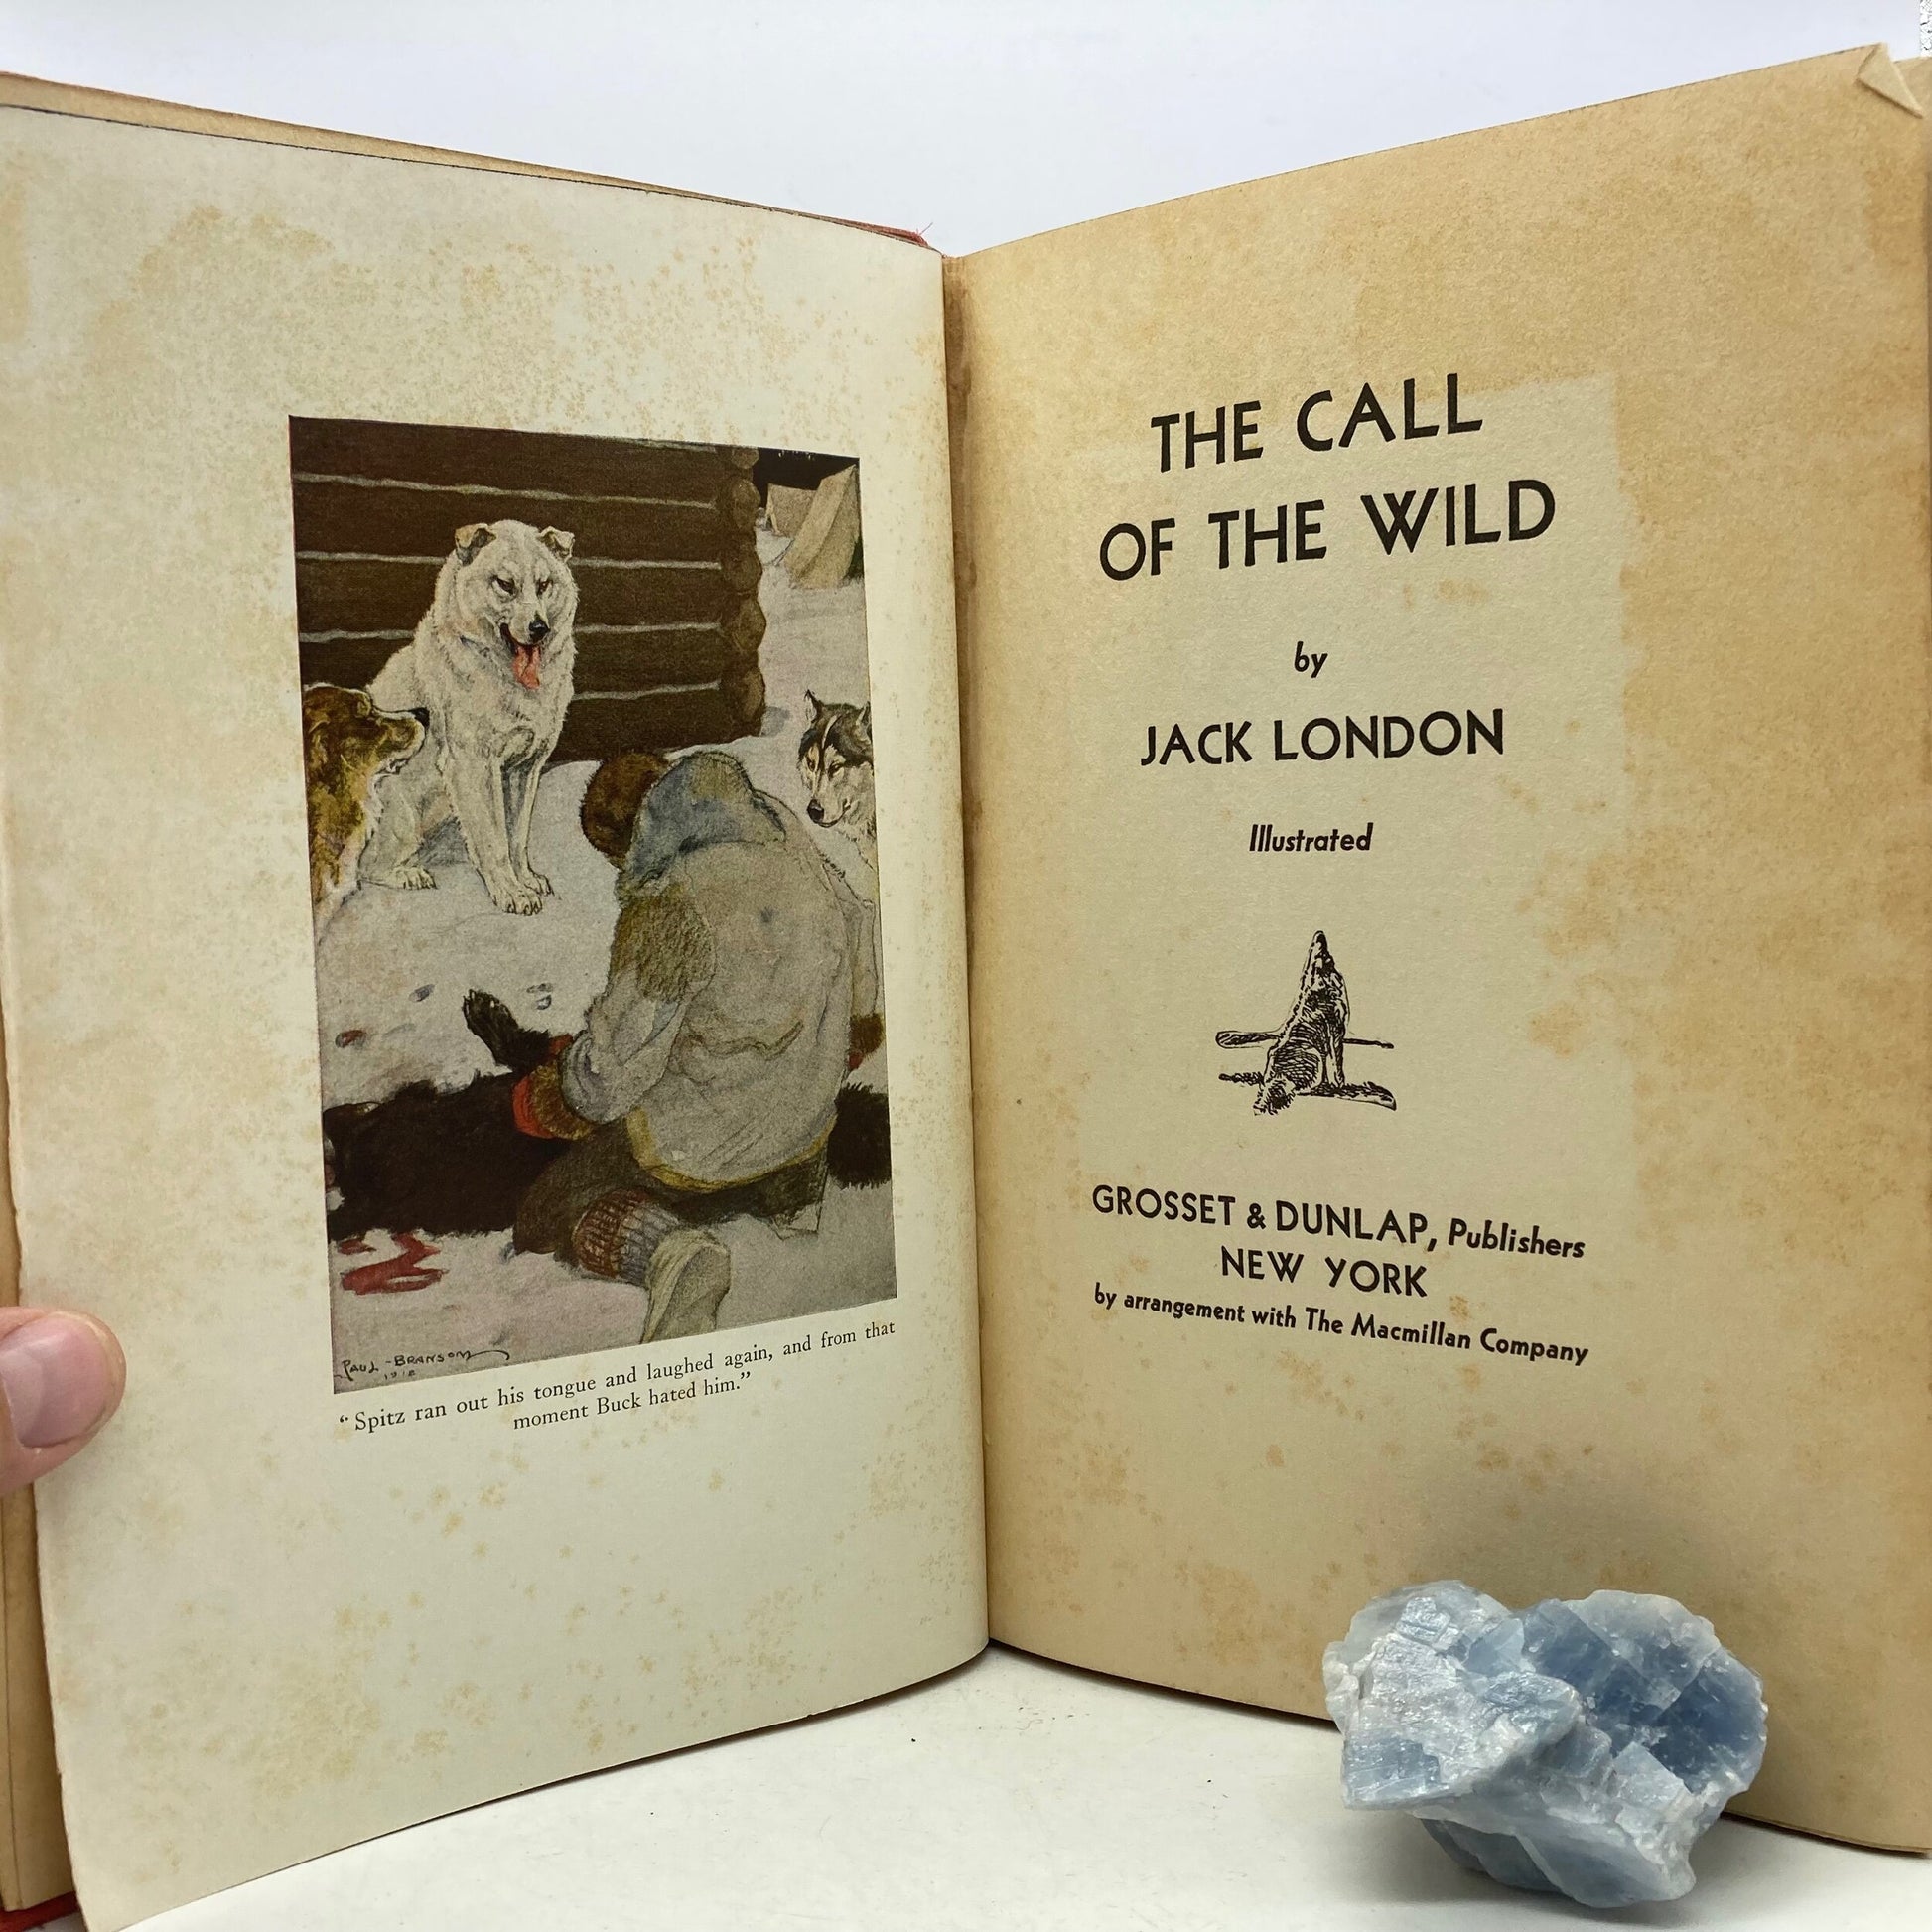 LONDON, Jack "The Call of the Wild" [Grosset & Dunlap, 1931] - Buzz Bookstore